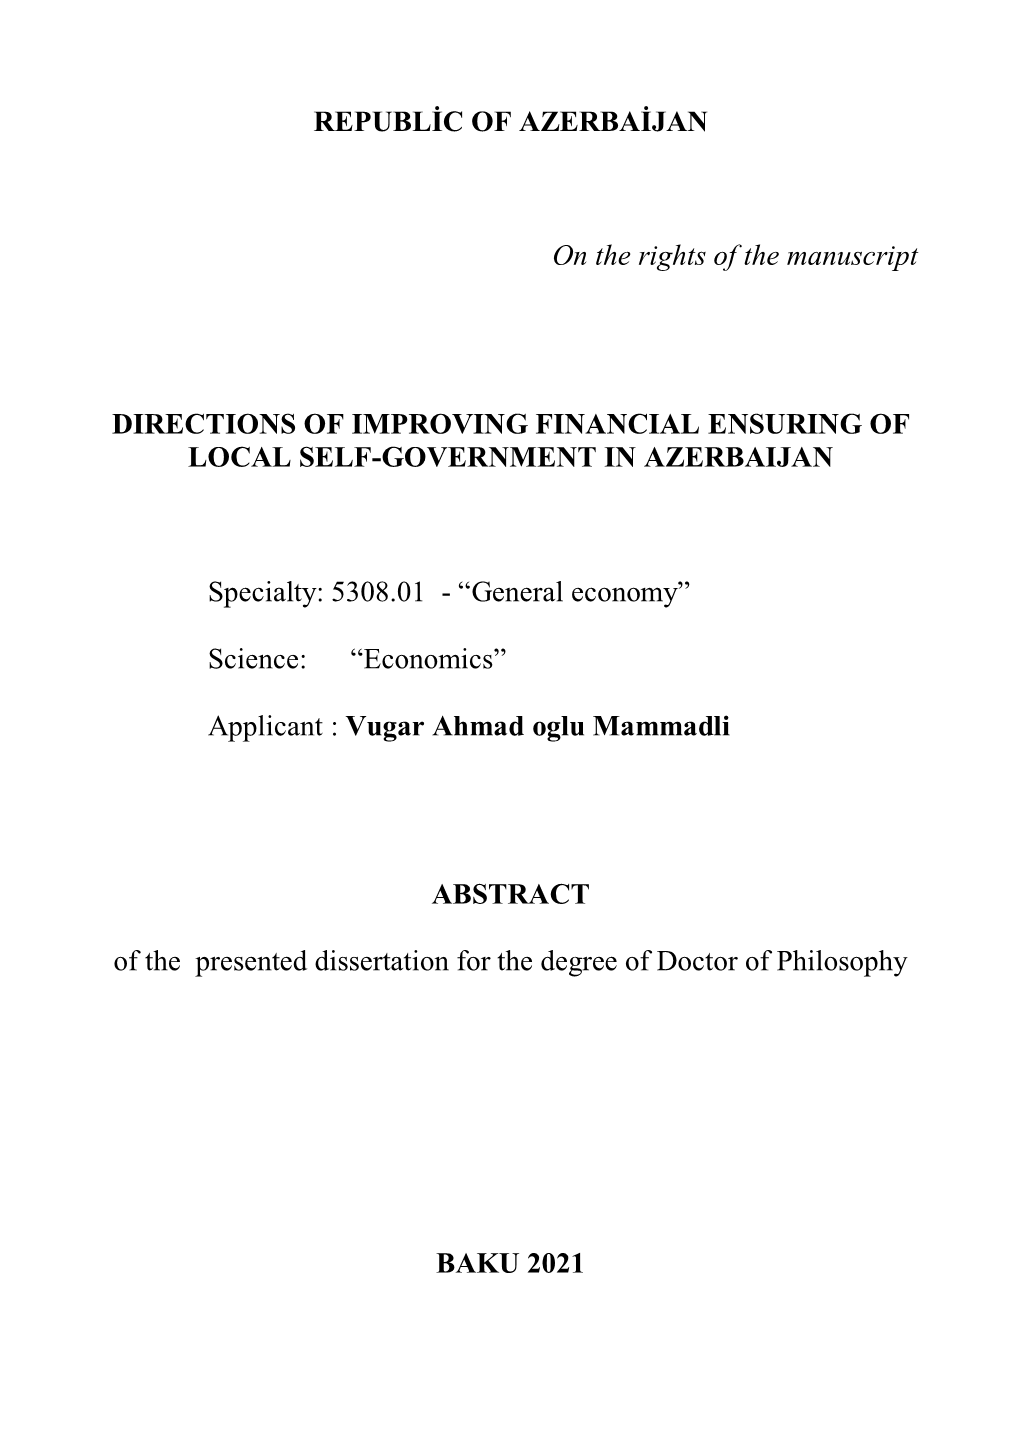 REPUBLİC of AZERBAİJAN on the Rights of the Manuscript DIRECTIONS of IMPROVING FINANCIAL ENSURING of LOCAL SELF-GOVERNMENT IN